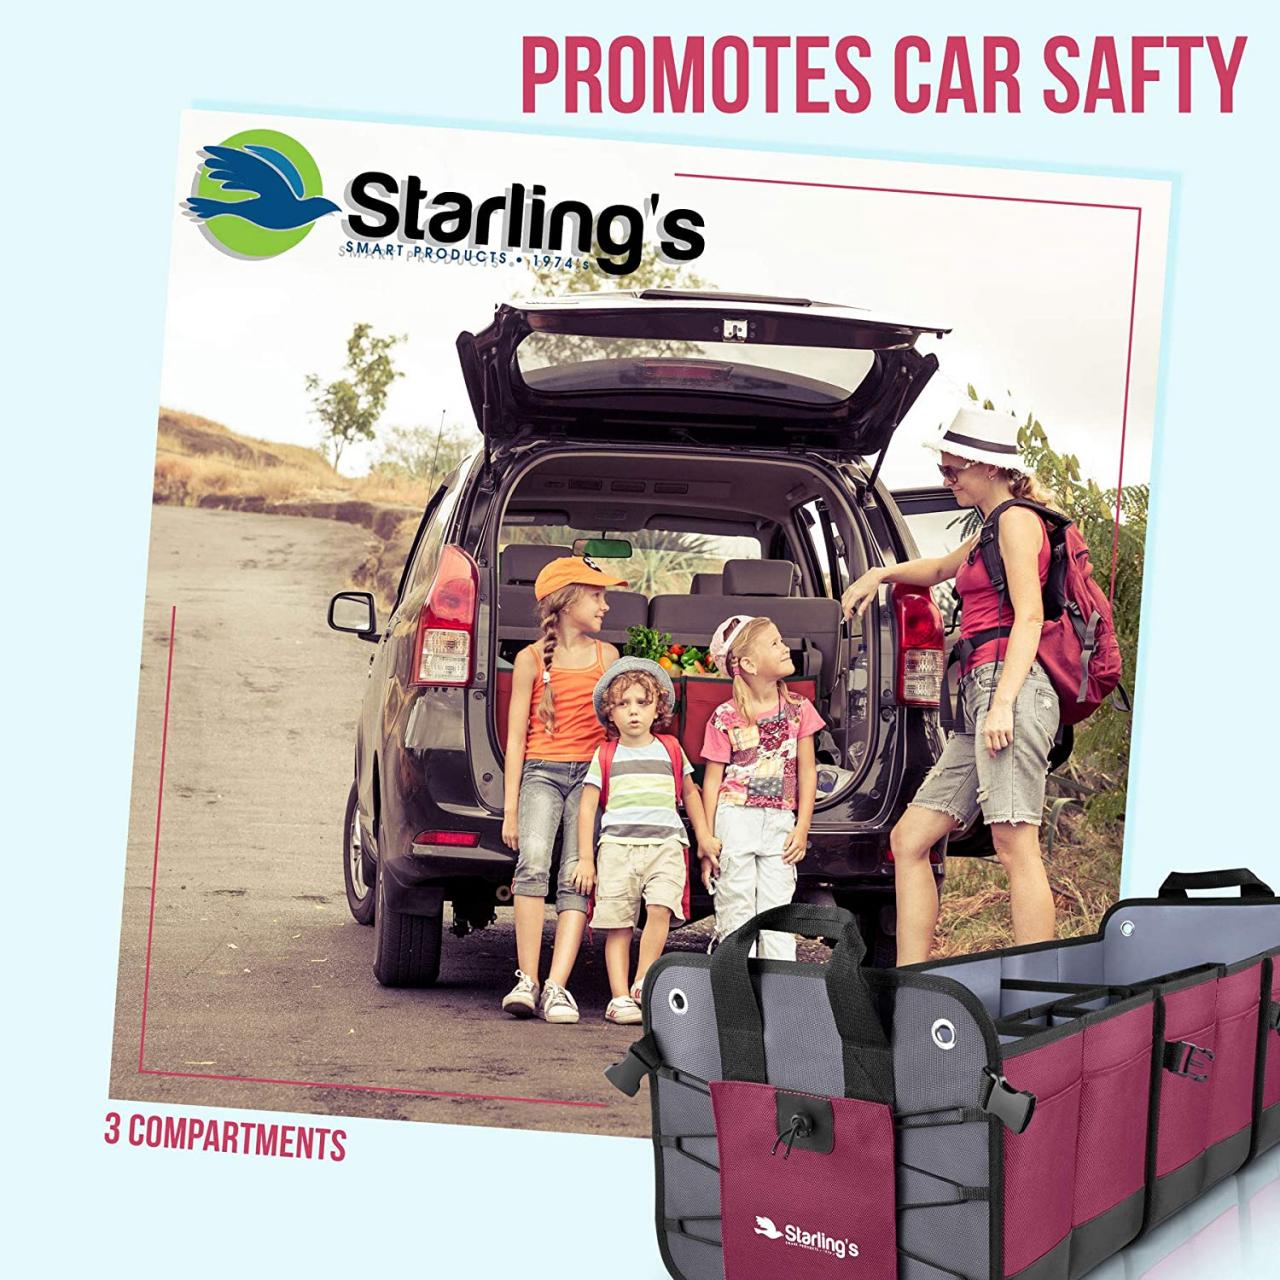 Buy Starling's Car Trunk Organizer - Durable Storage SUV Cargo Organizer  Adjustable (Bordeaux, 3 Compartments) Online in Hong Kong. B07RTWFWZP